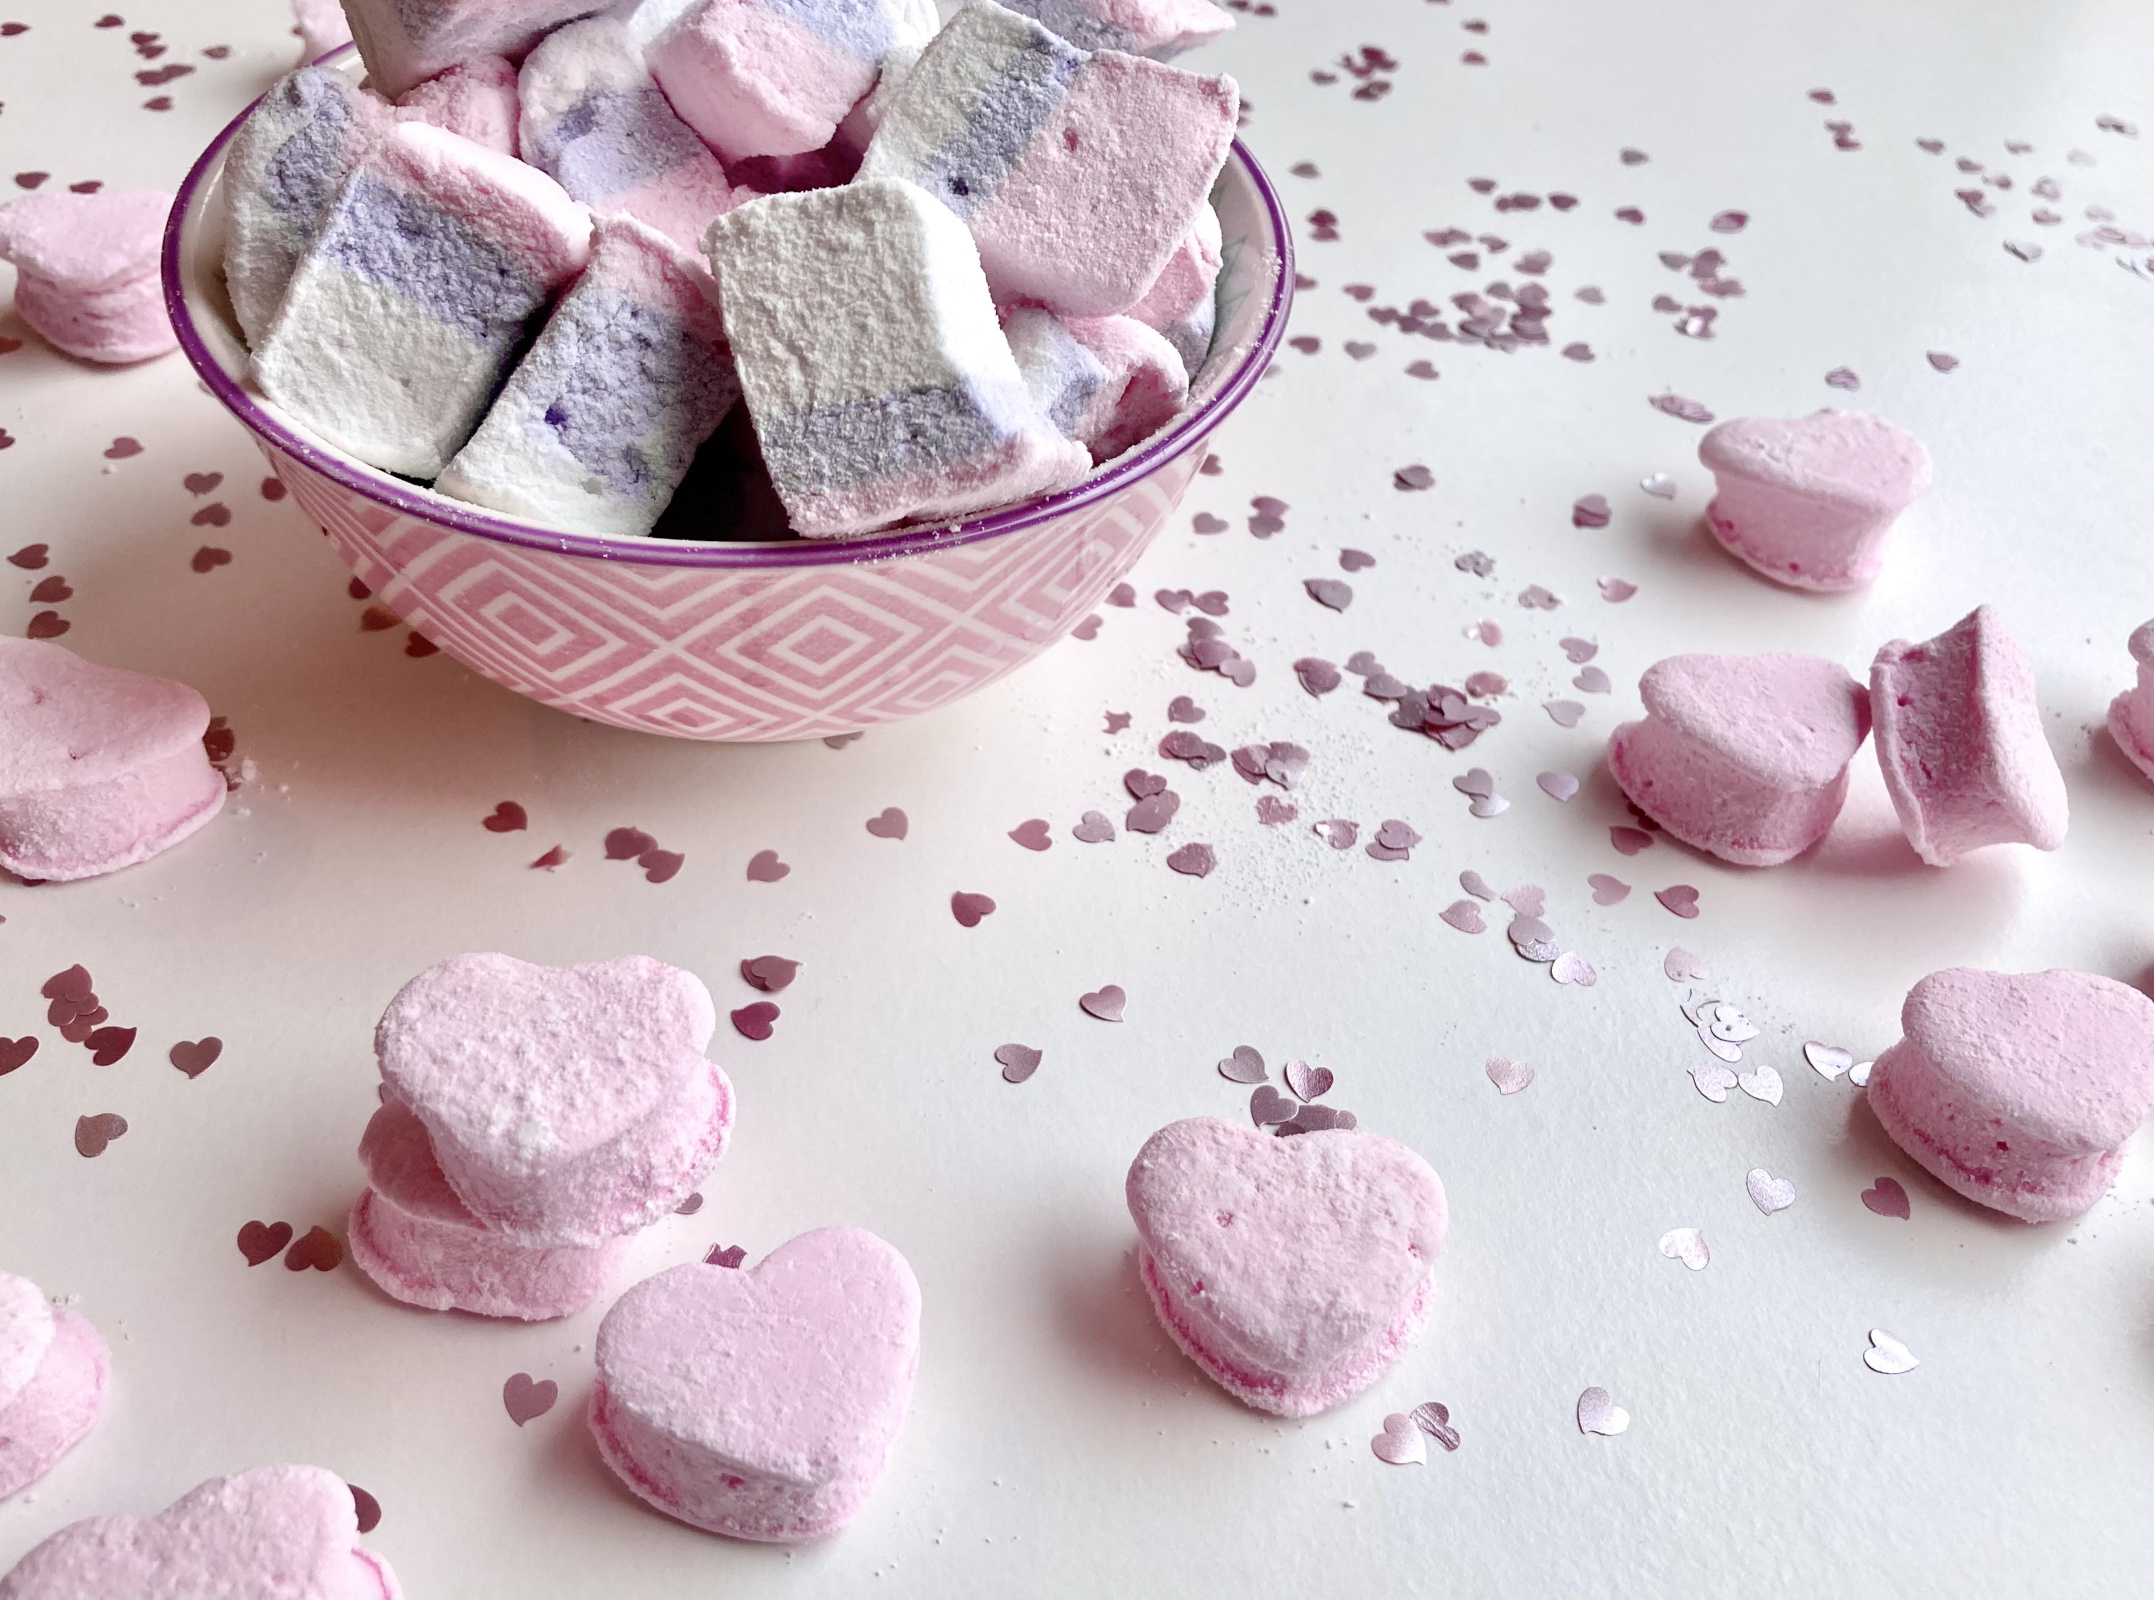 Marshmallow: Heart-shaped candy, bite-sized “pillows” dusted with rice flour or powdered sugar. 2160x1600 HD Wallpaper.